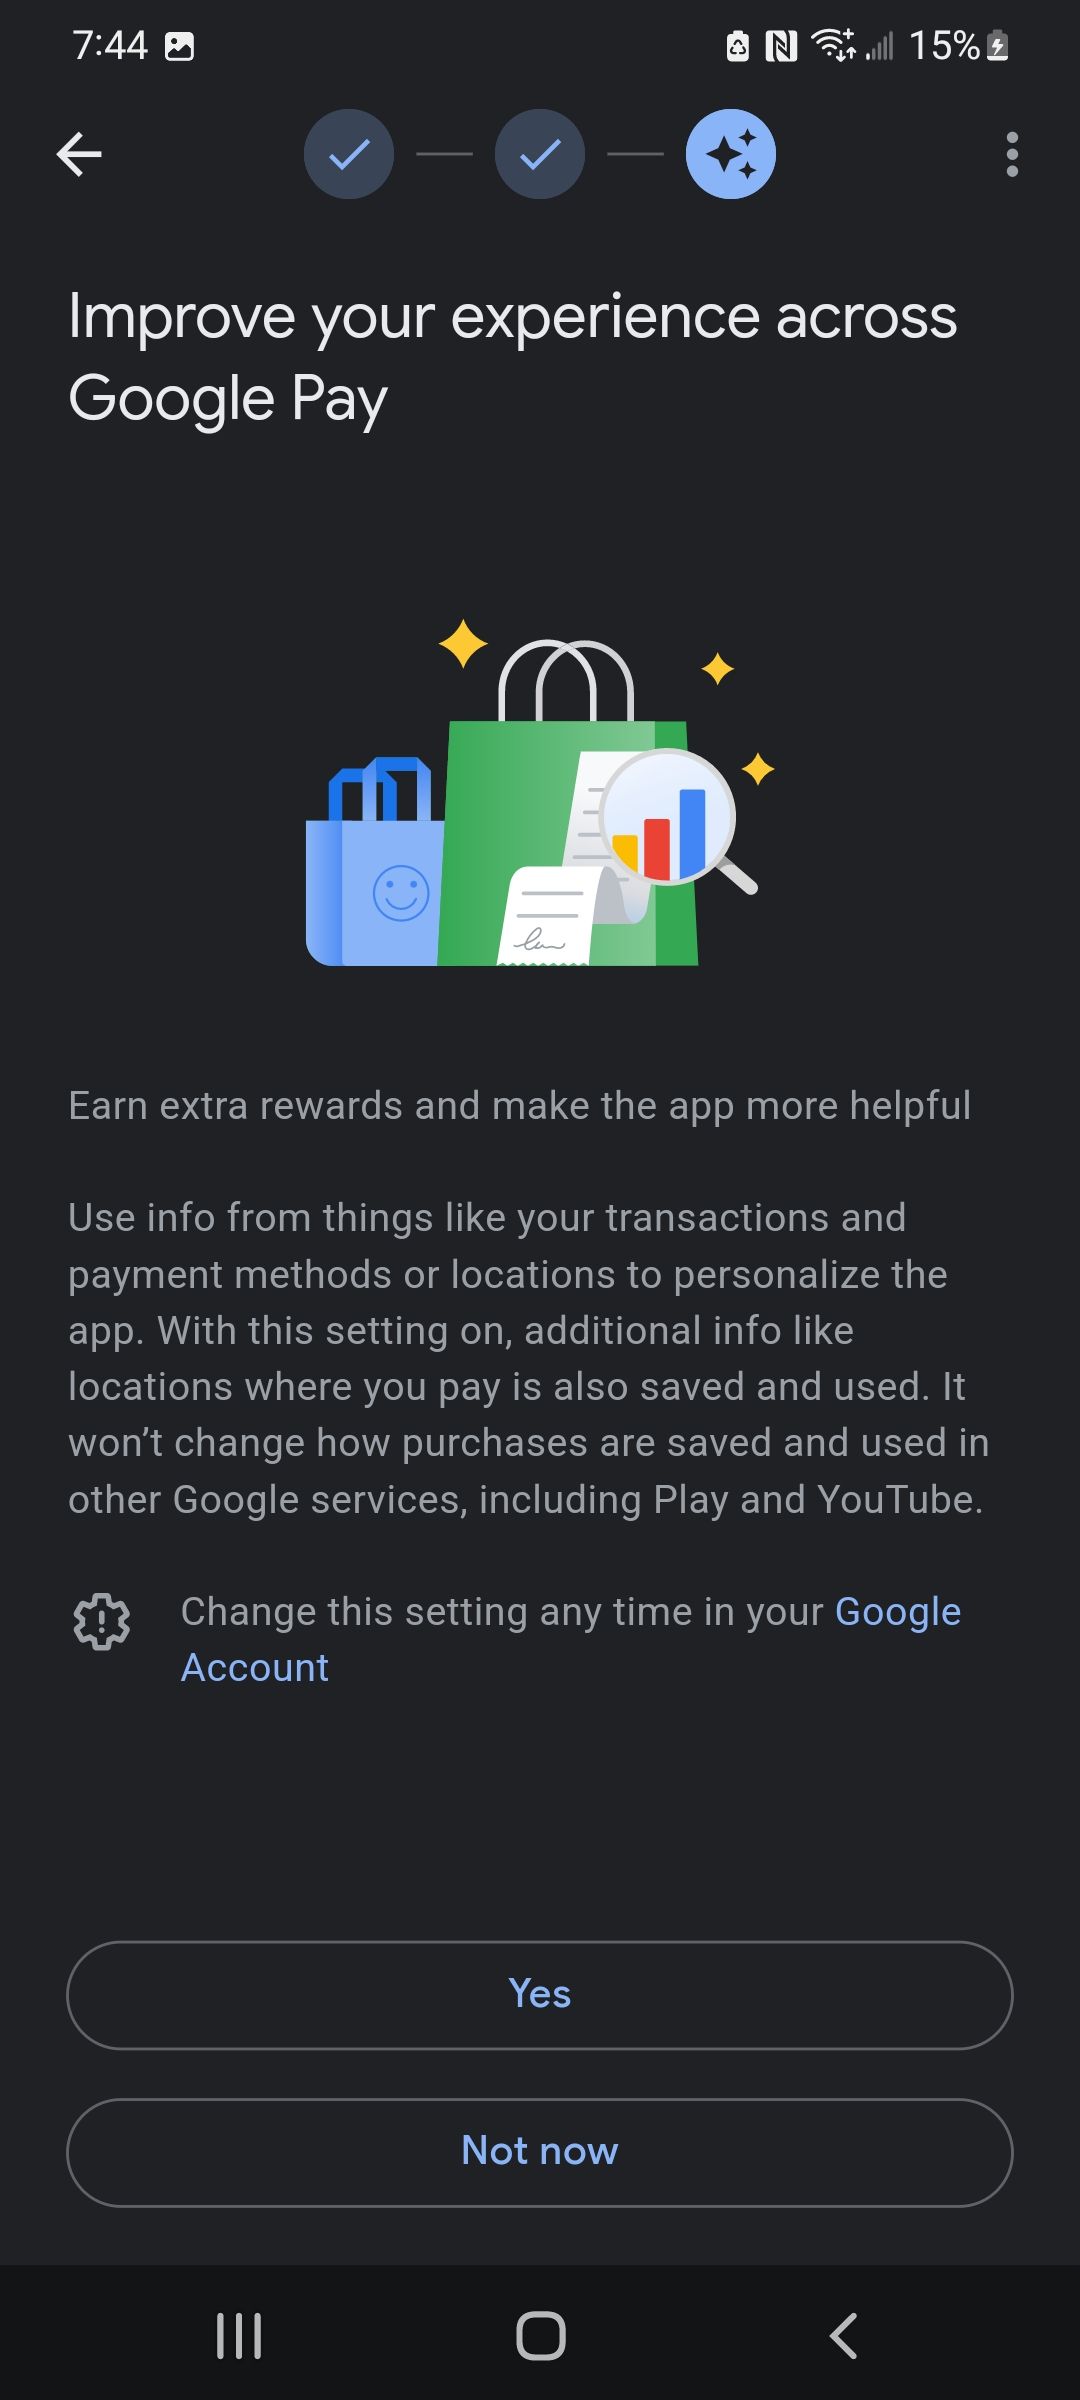 Google Pay request to collect activity data.